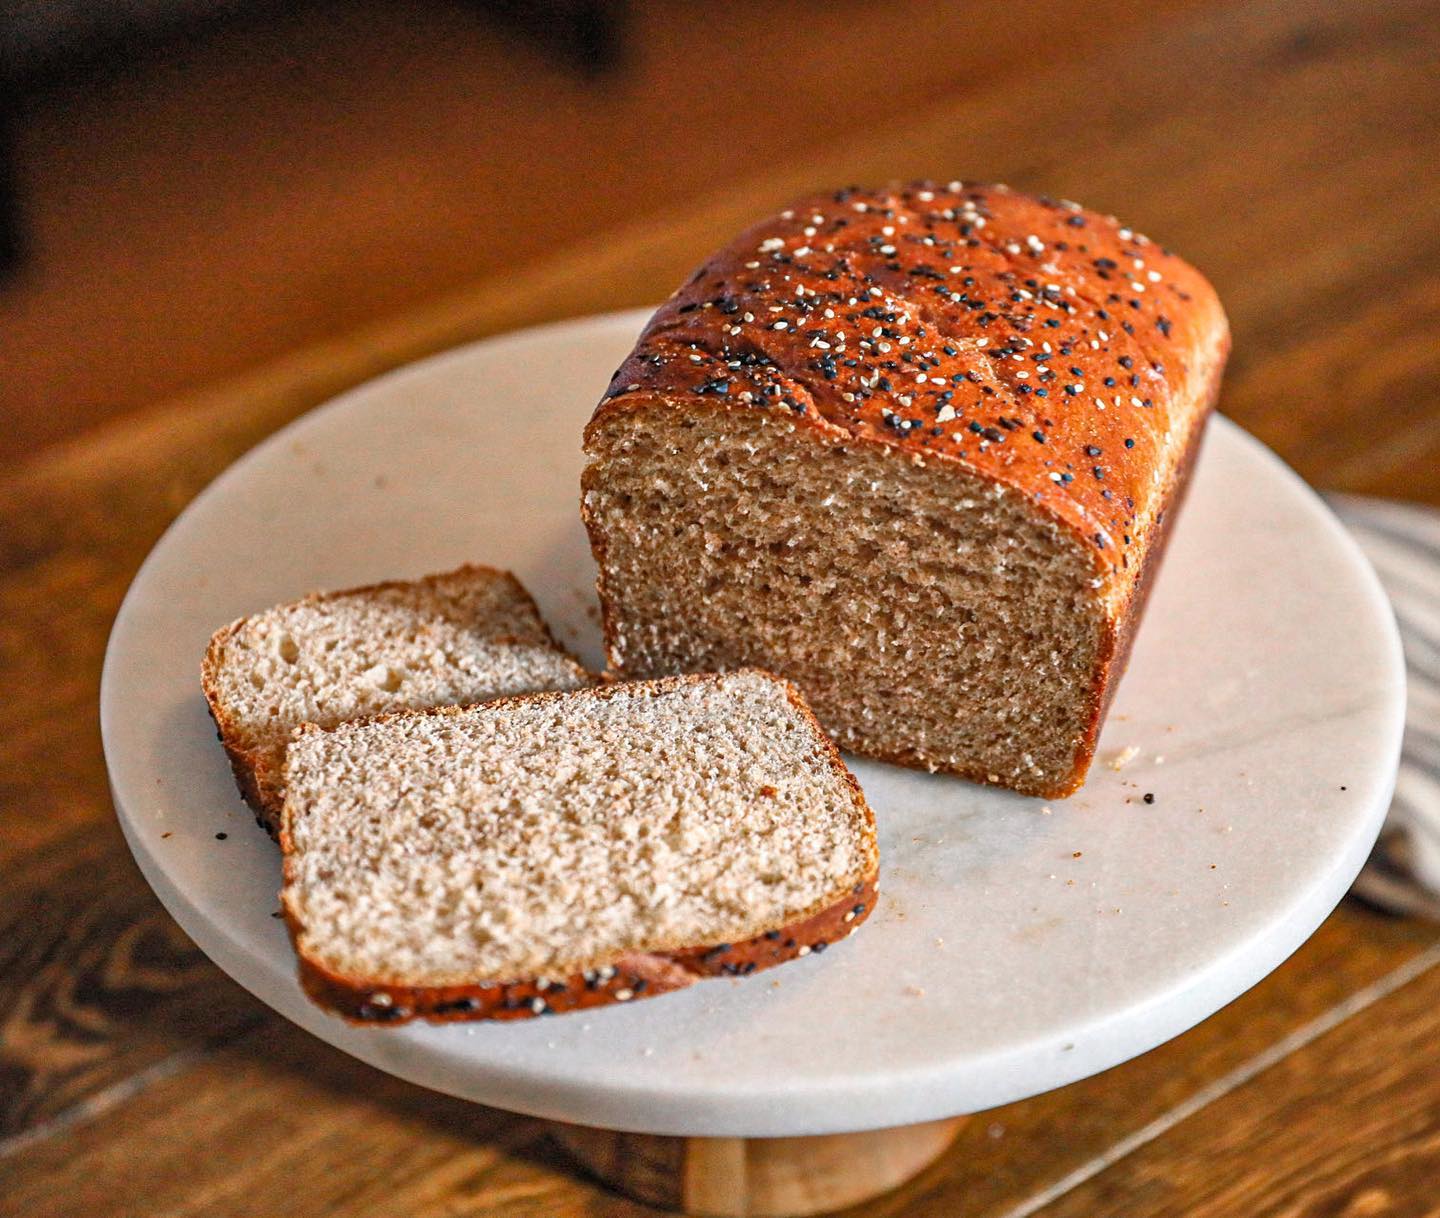 A loaf of bread, with two slices resting next to it, sits on a white plate